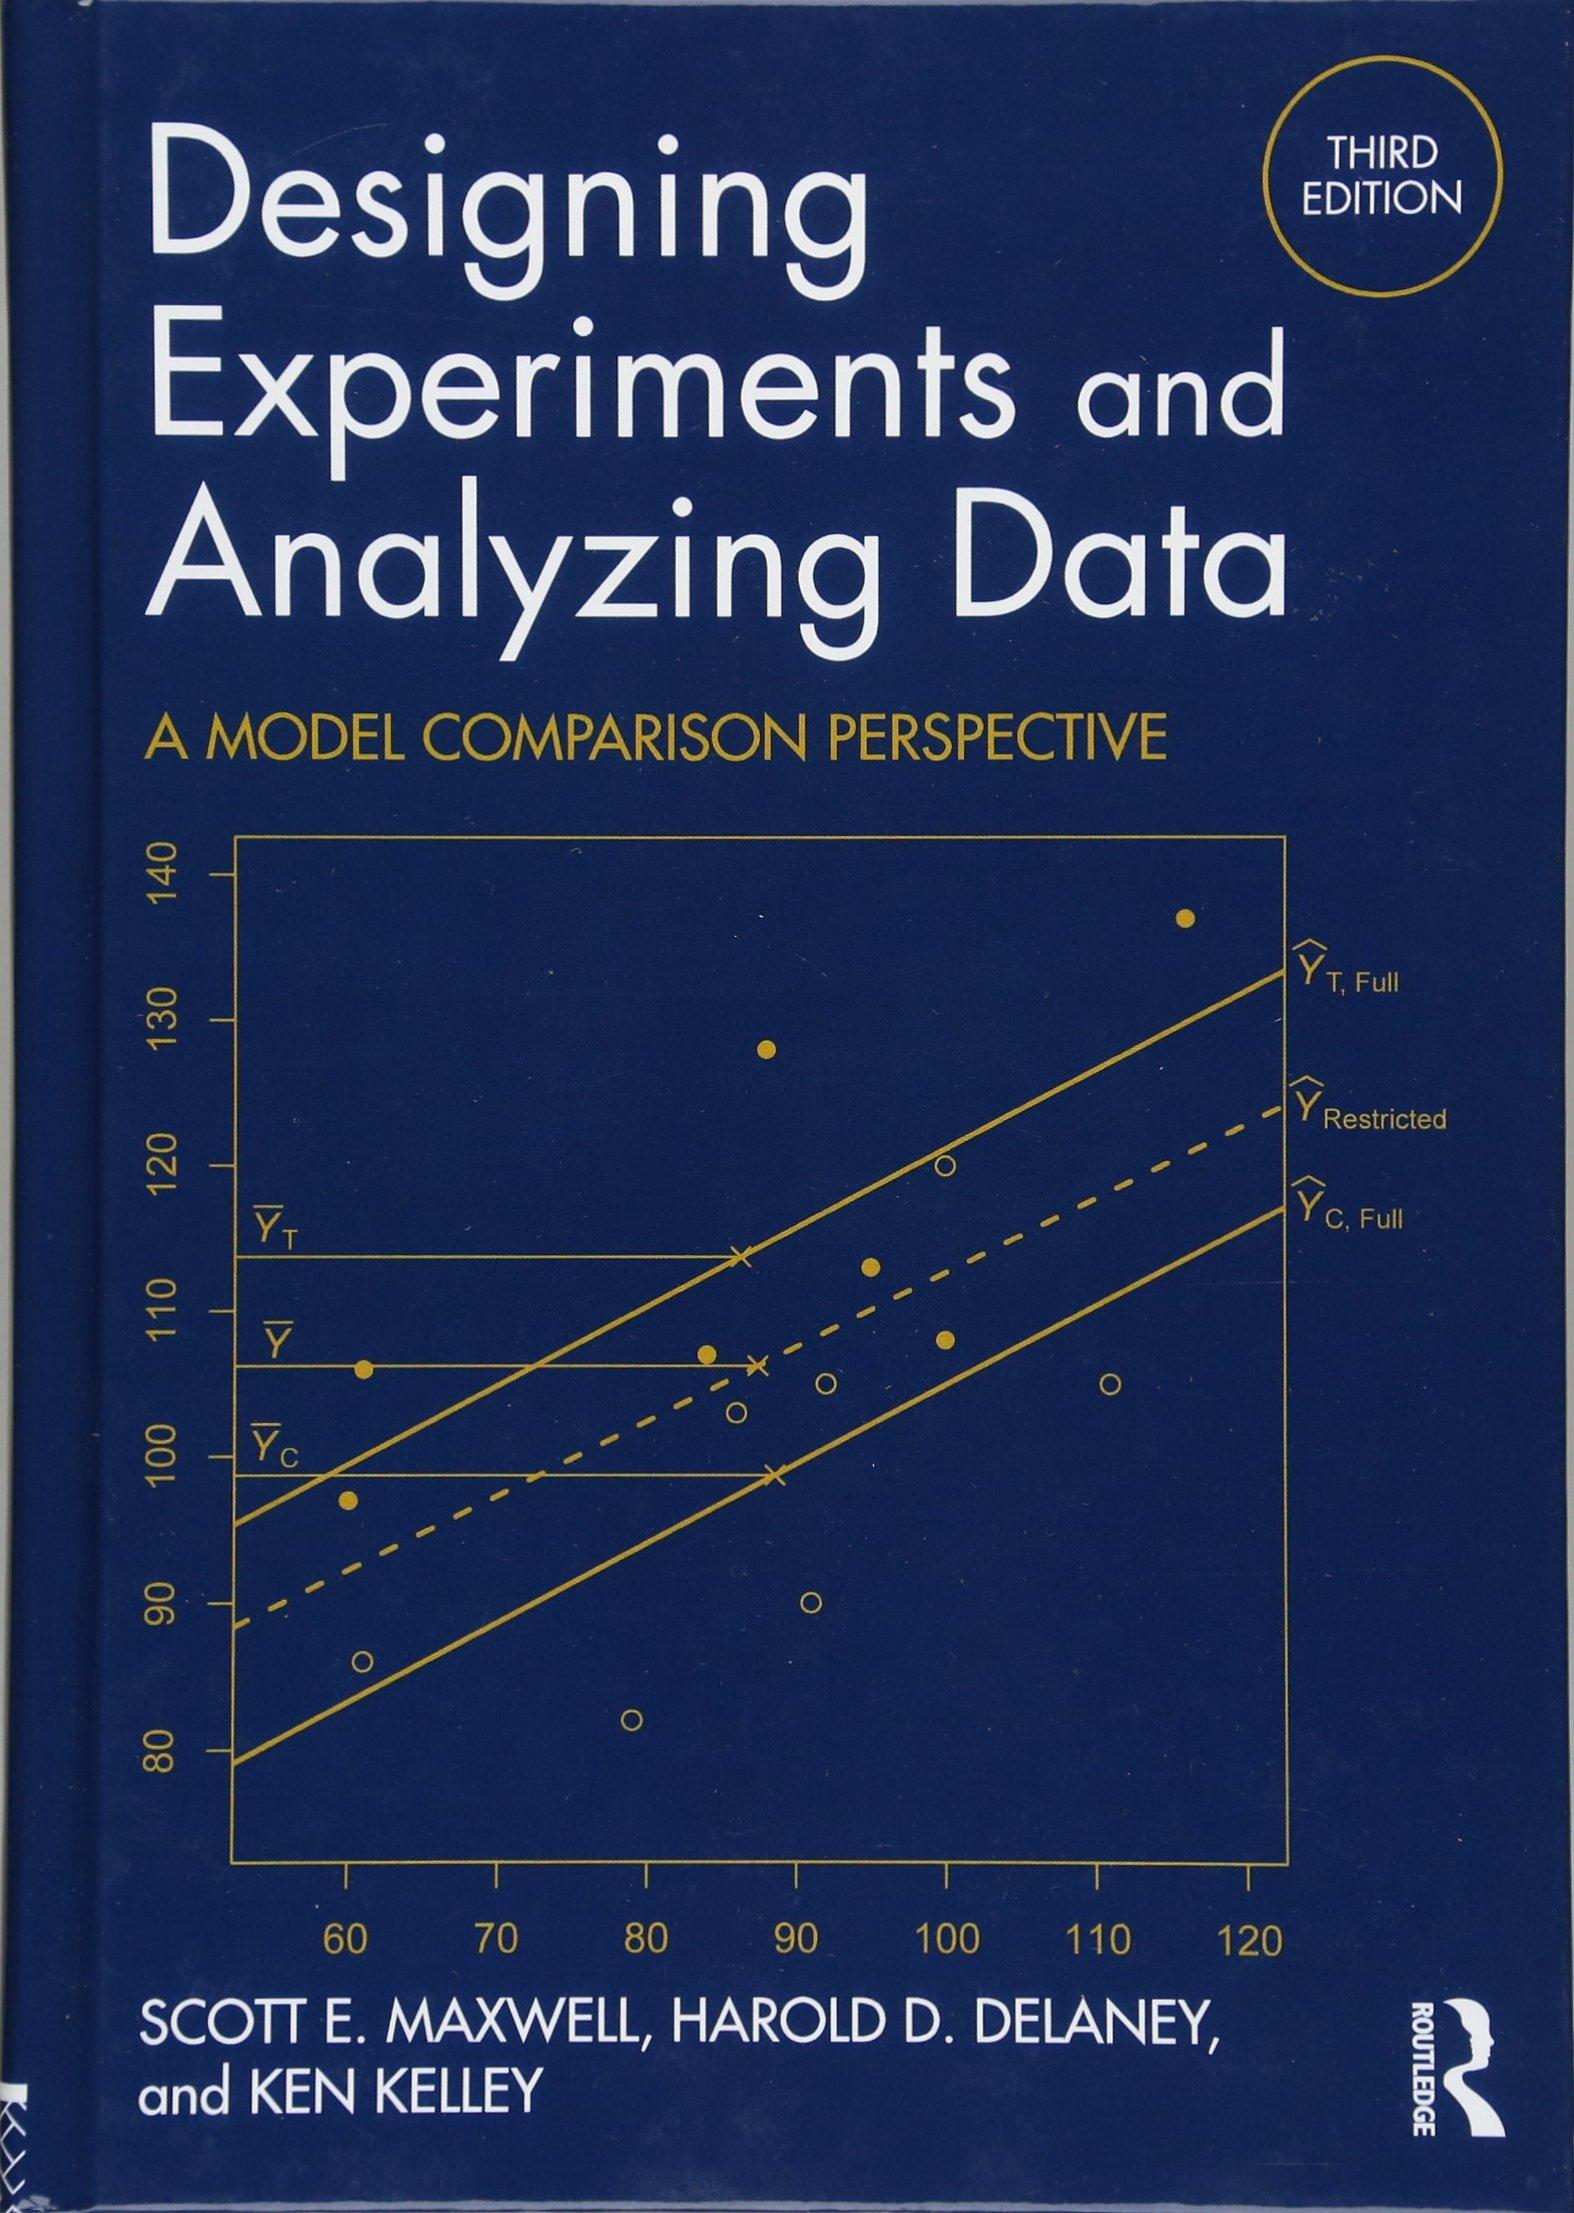 designing experiments and analyzing data a model comparison perspective 3rd edition scott e. maxwell, harold